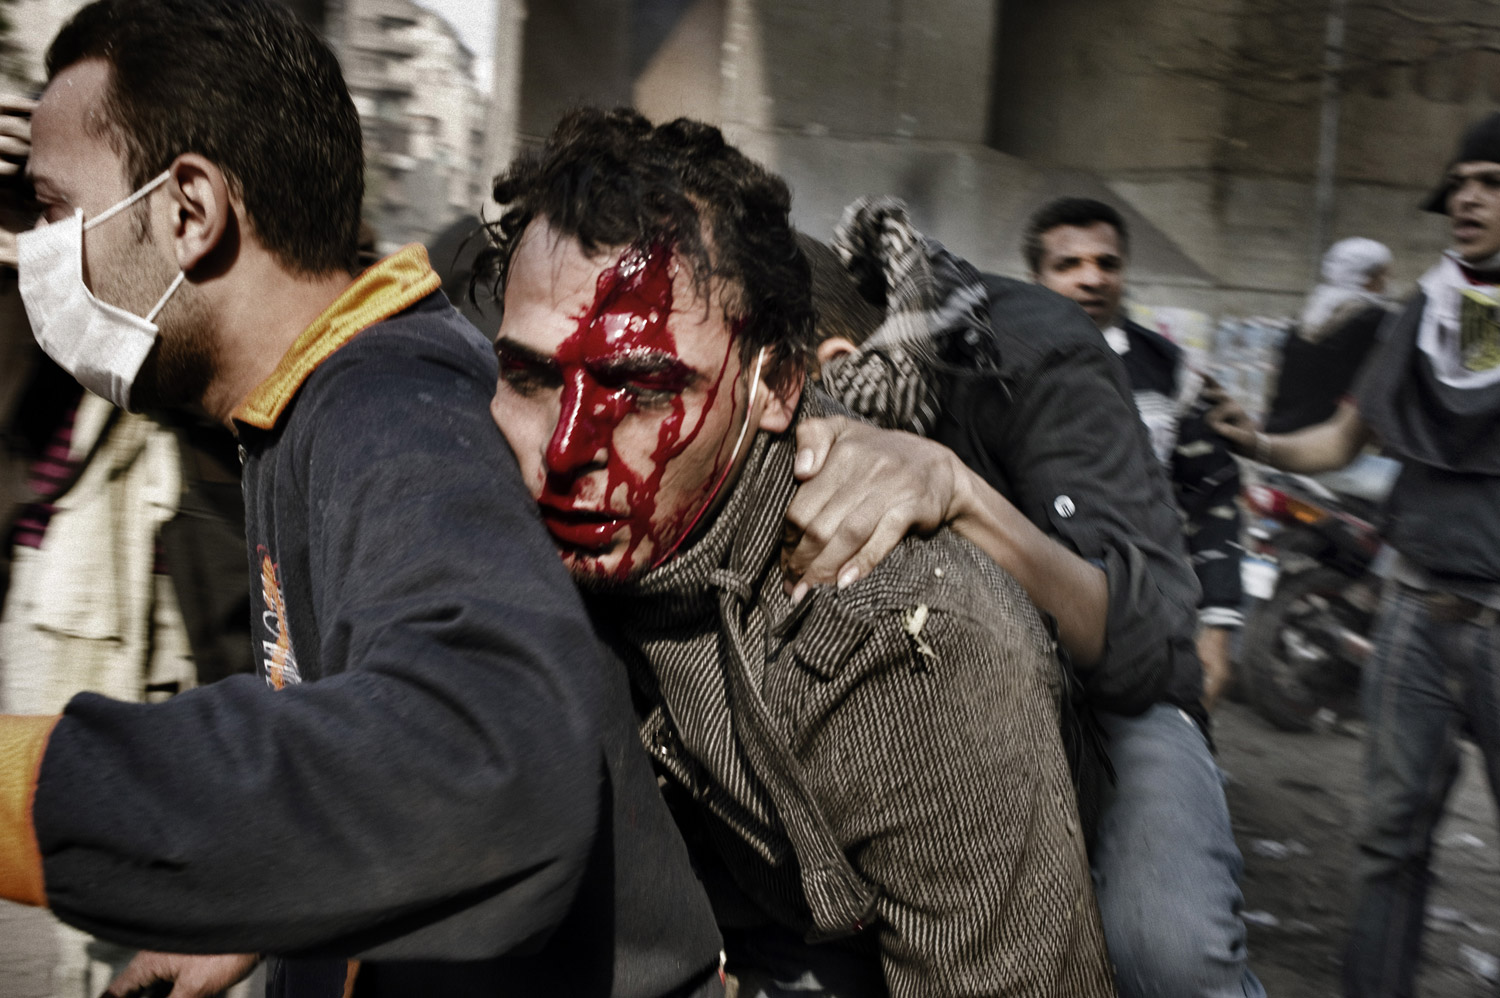 A severely wounded protester is evacuated by other demonstrators during clashes, November 23, 2011.